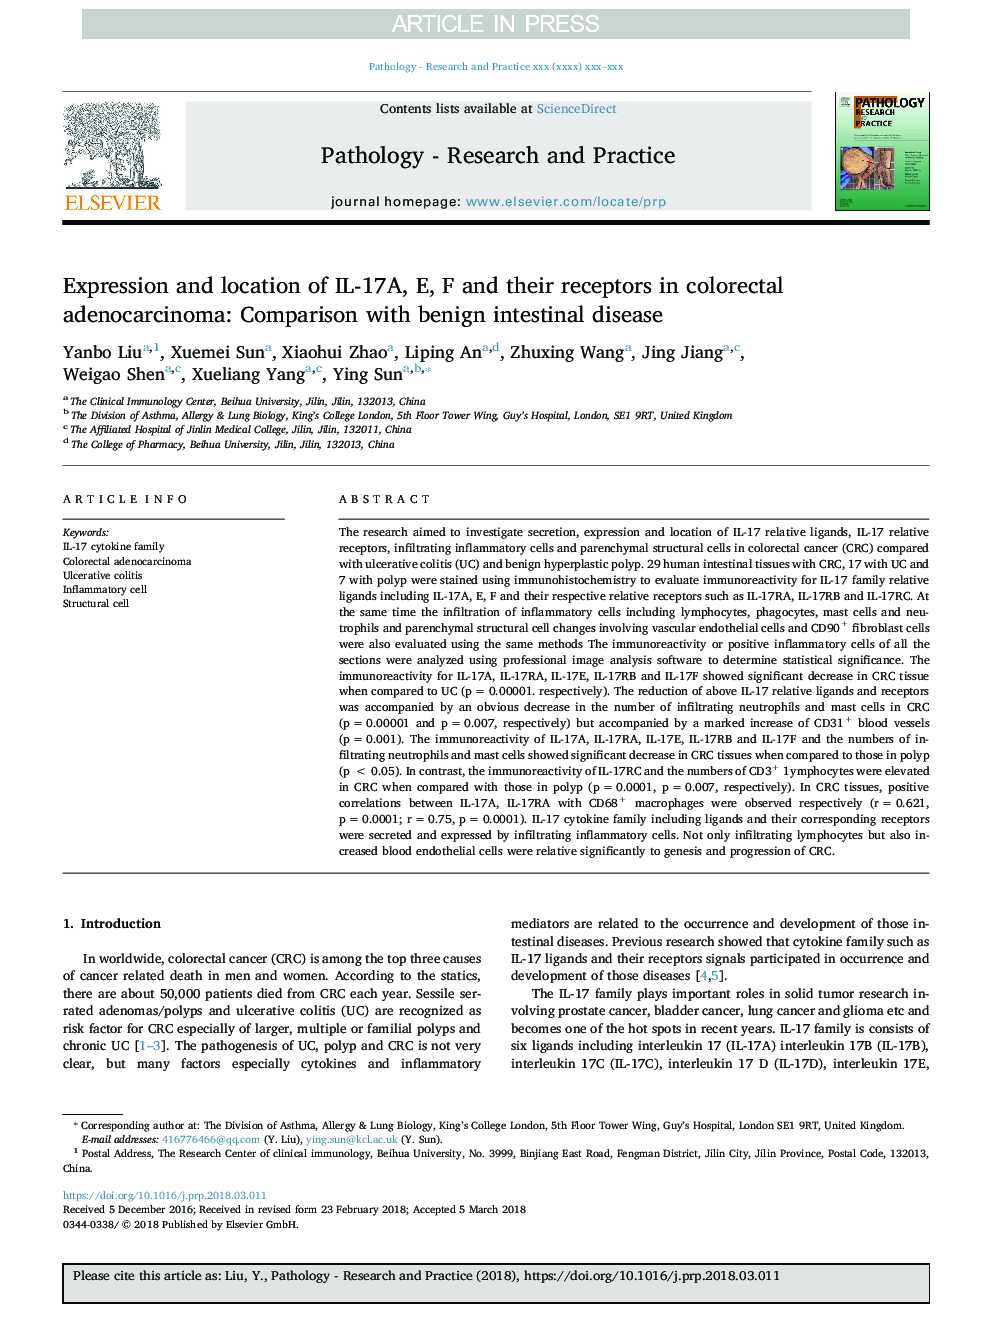 Expression and location of IL-17A, E, F and their receptors in colorectal adenocarcinoma: Comparison with benign intestinal disease